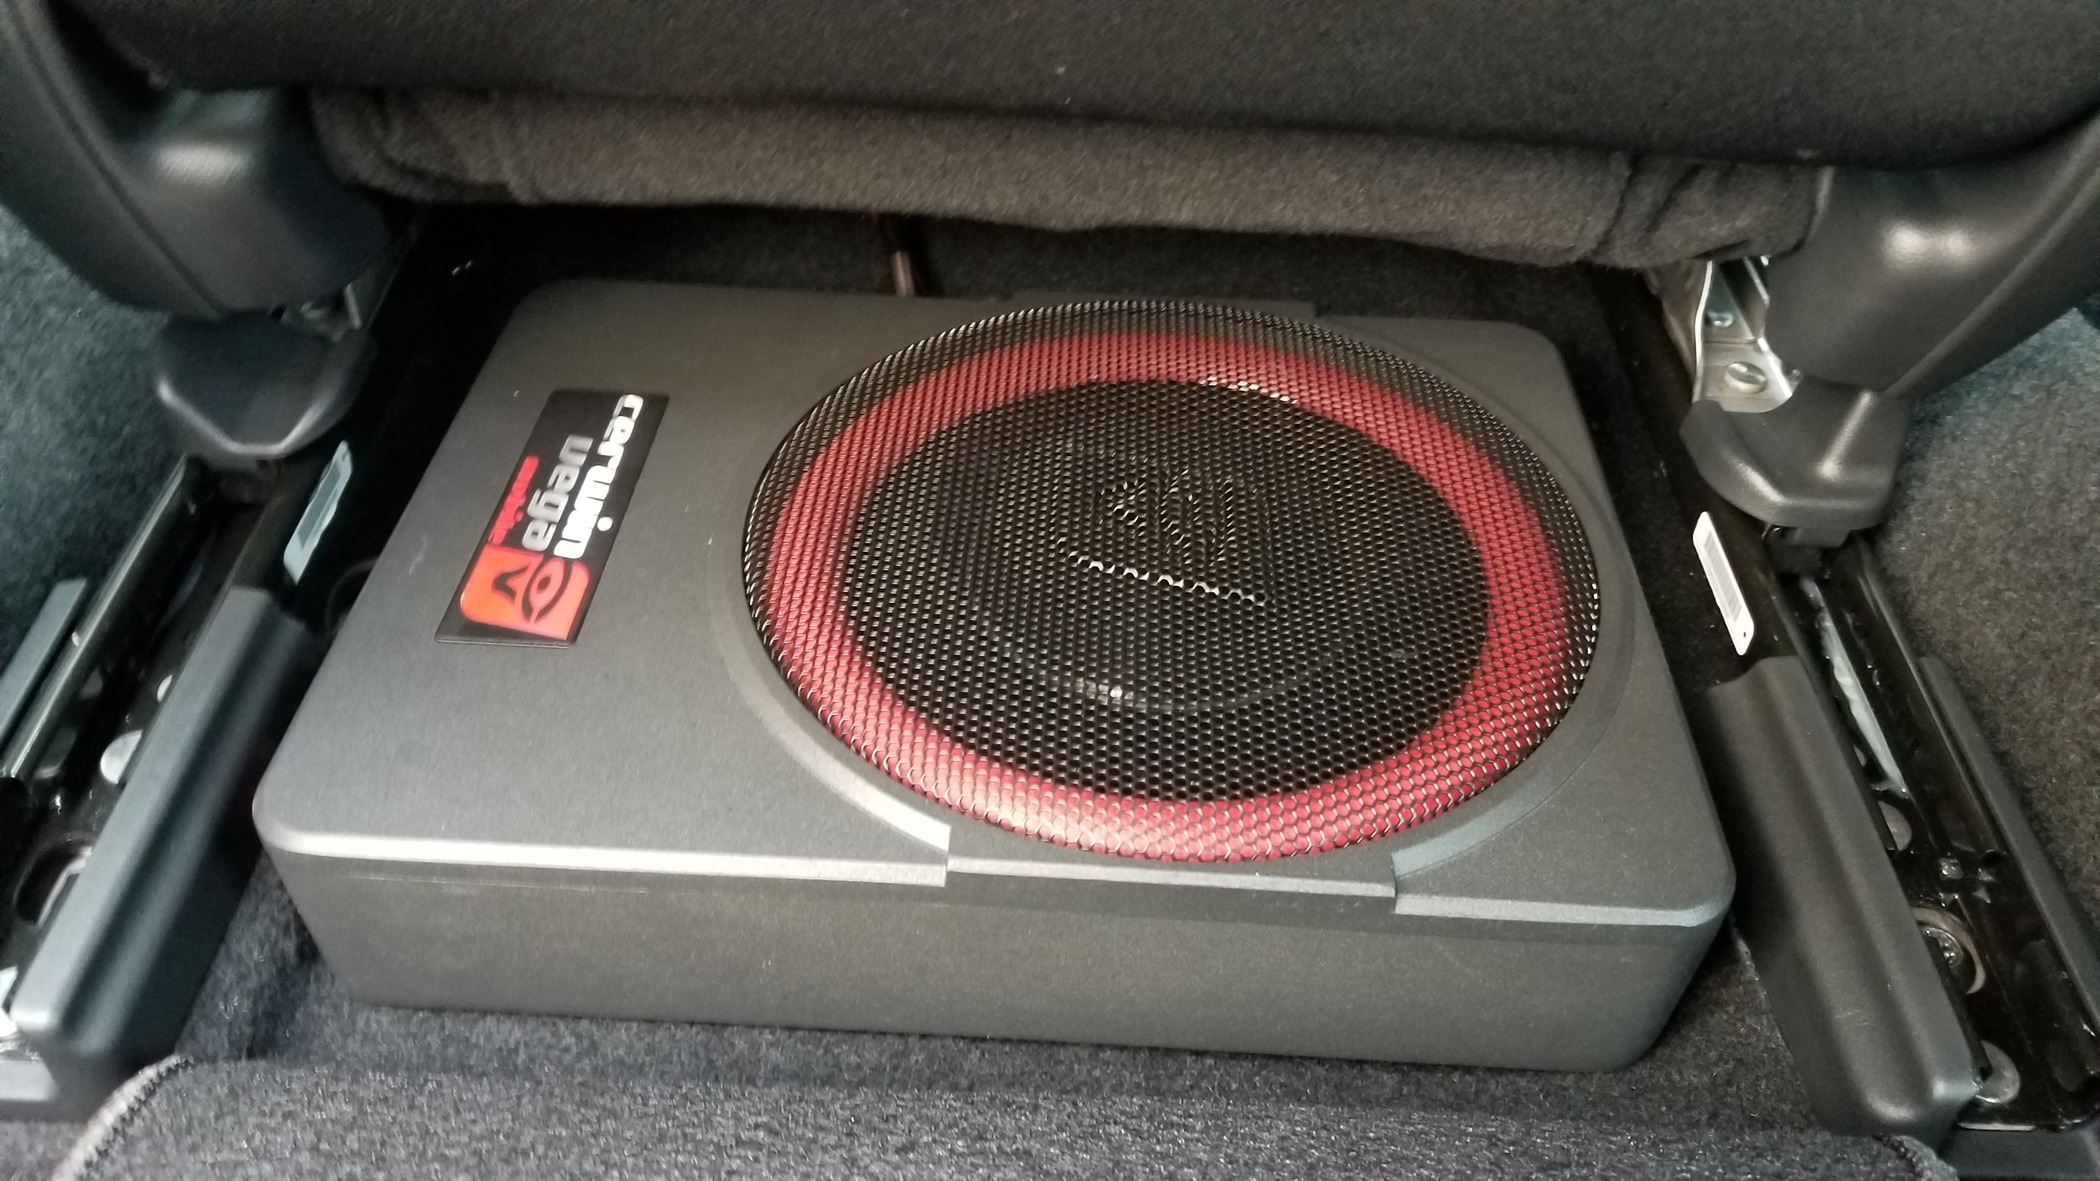 Honda Civic 10th gen What things should I buy for better audio? 20190725_183314